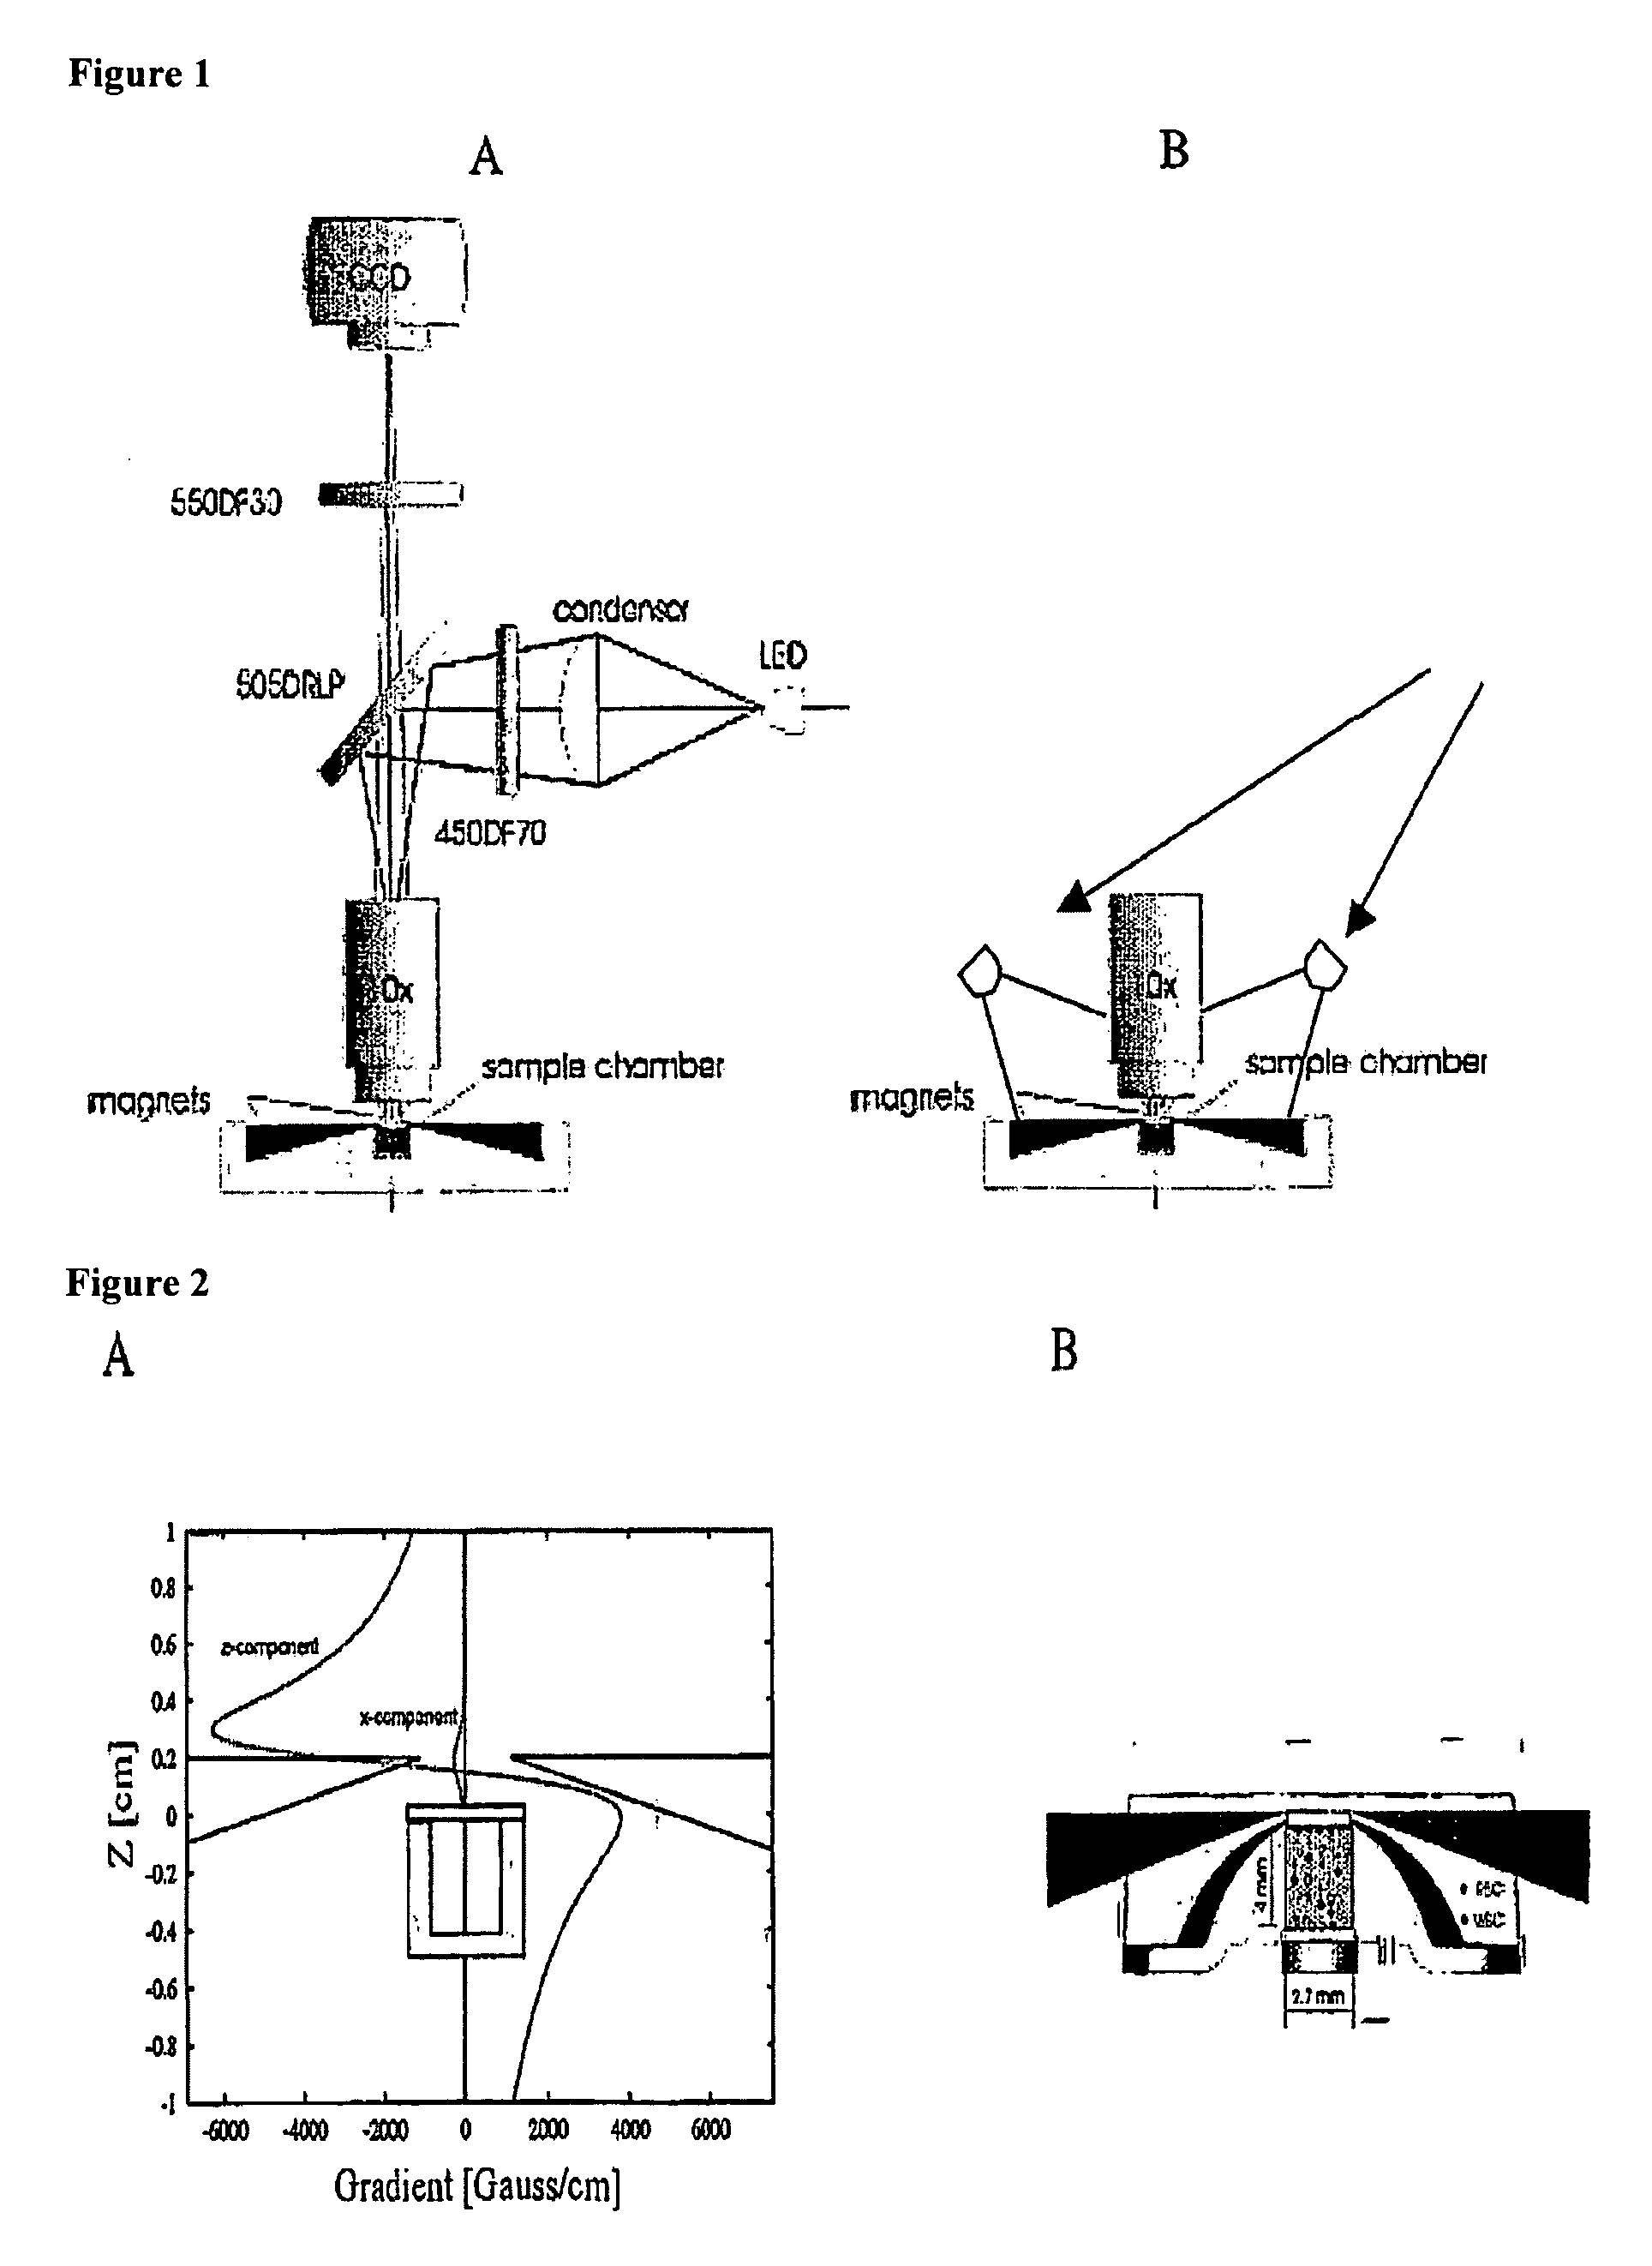 Methods and algorithms for cell enumeration in low-cost cytometer